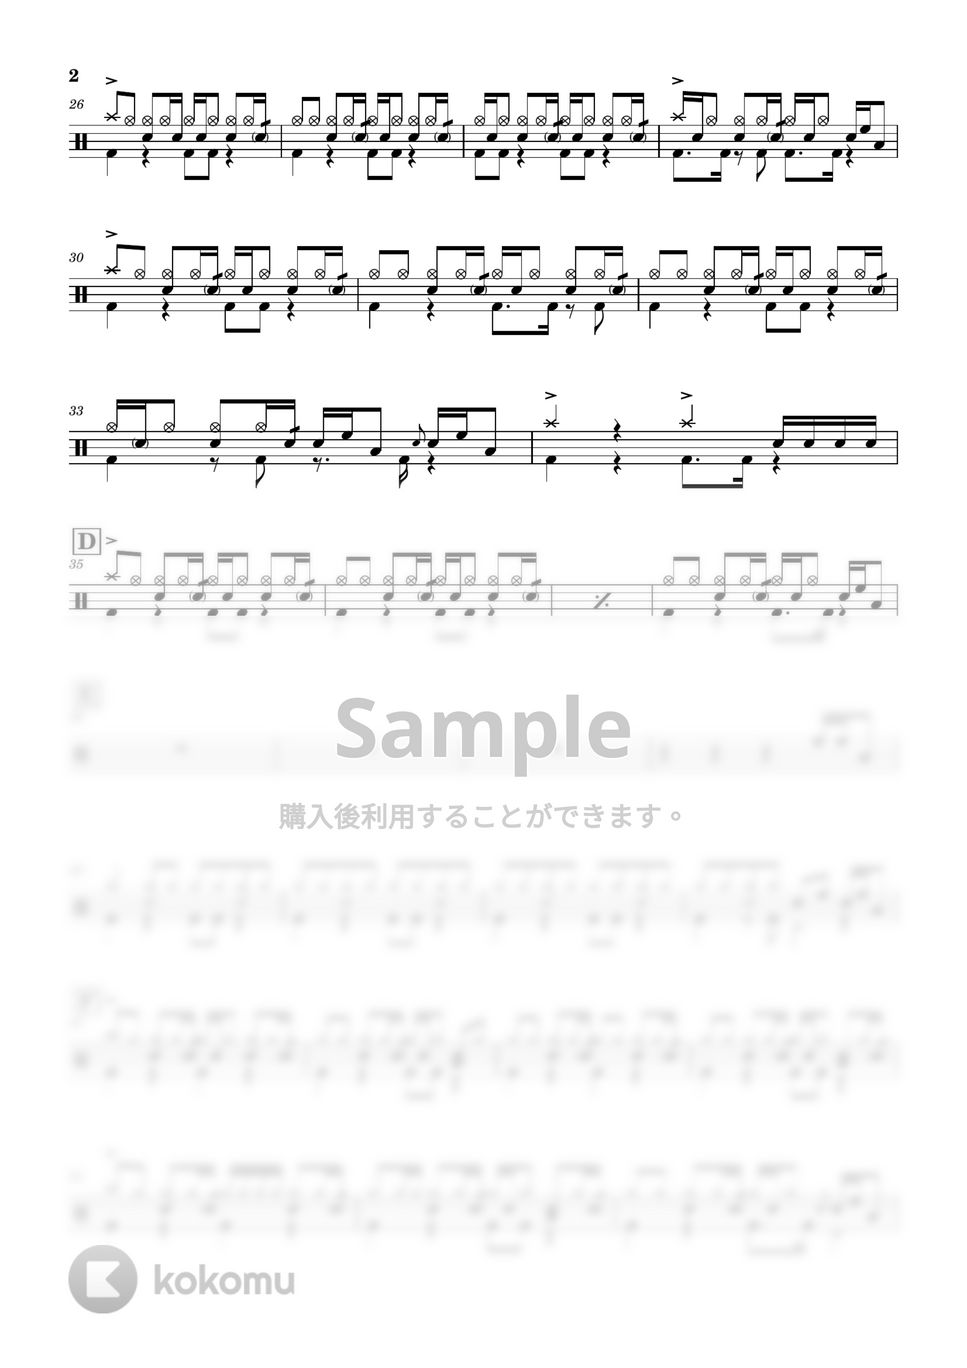 Ado - 会いたくて by Cookie's Drum Score